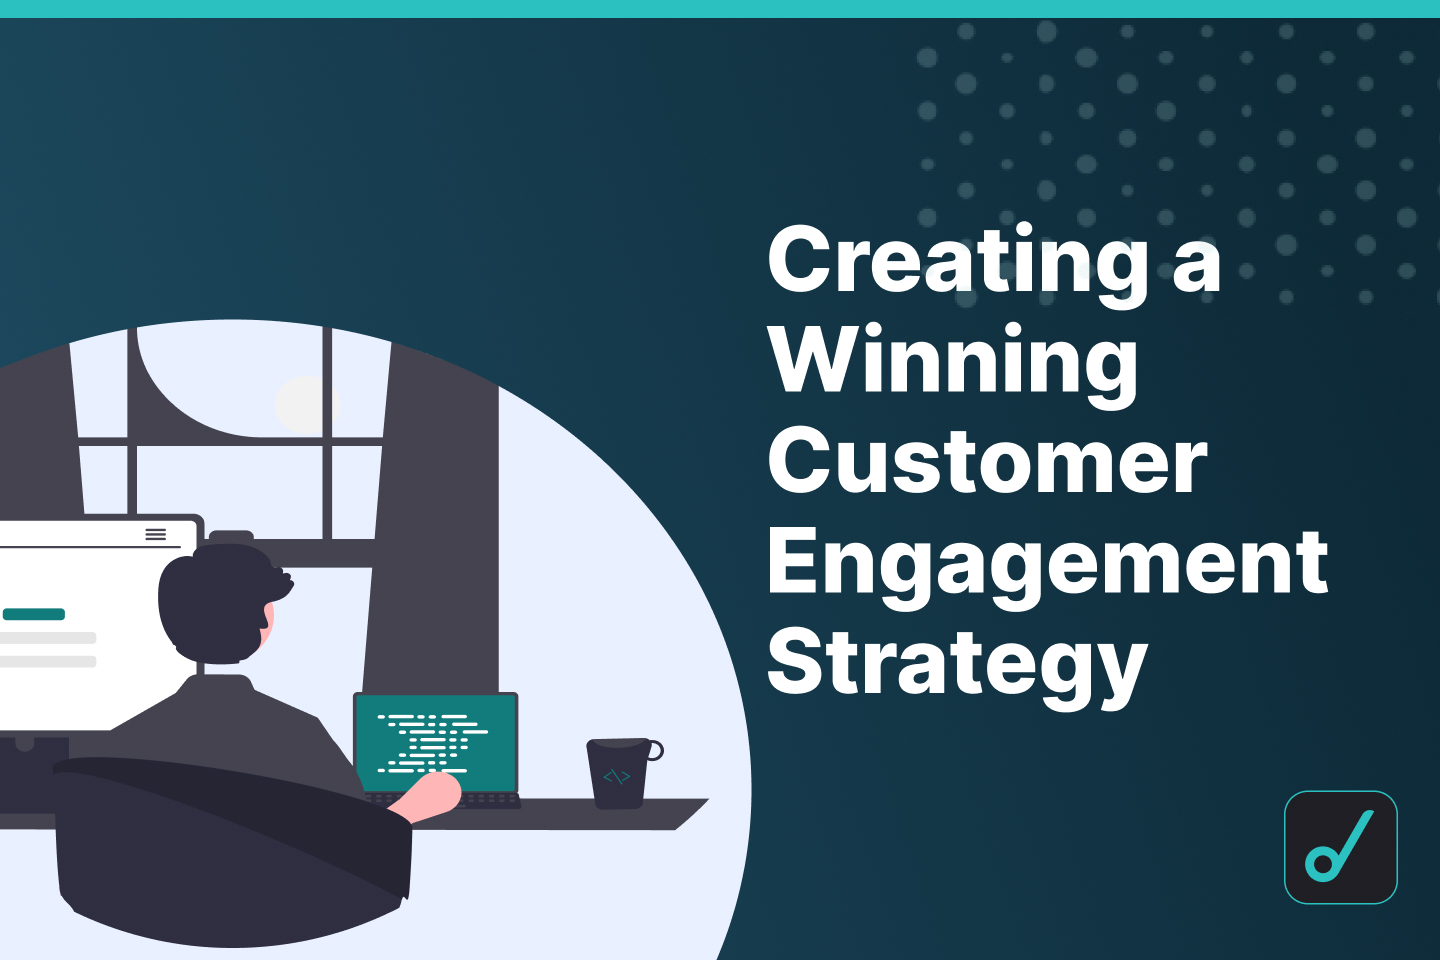 How to Build a Winning Customer Engagement Strategy for Your SaaS